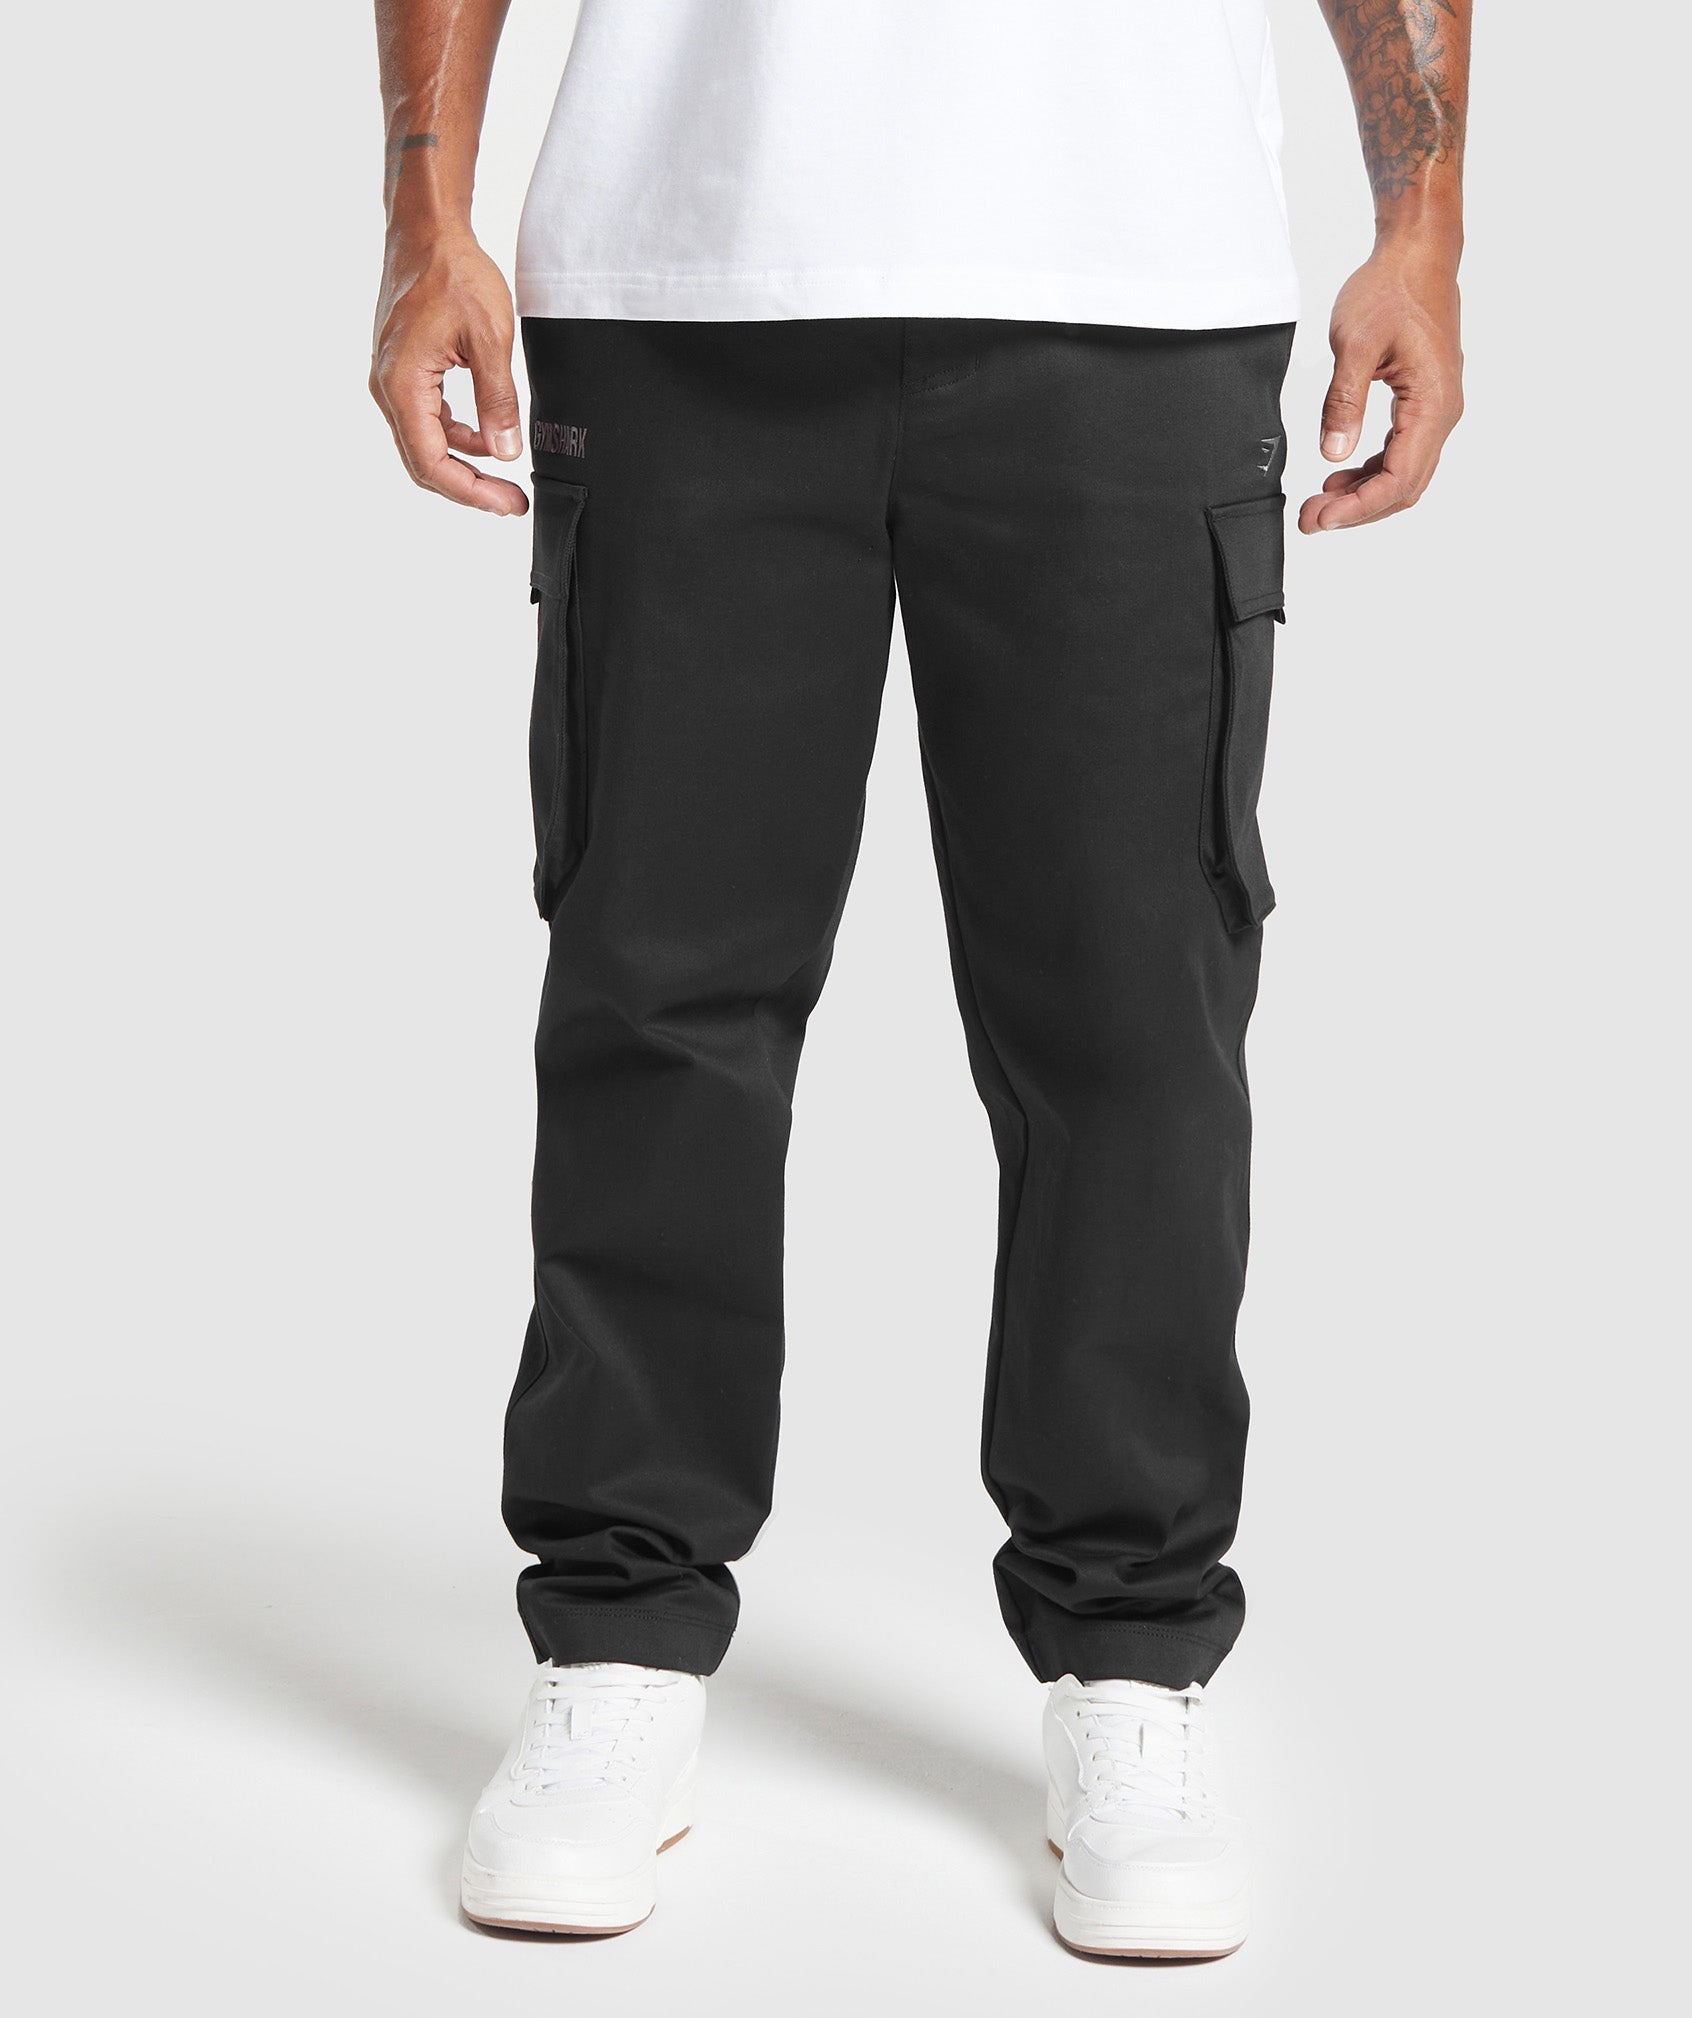 Rest Day Woven Cargo Pants in Black - view 2